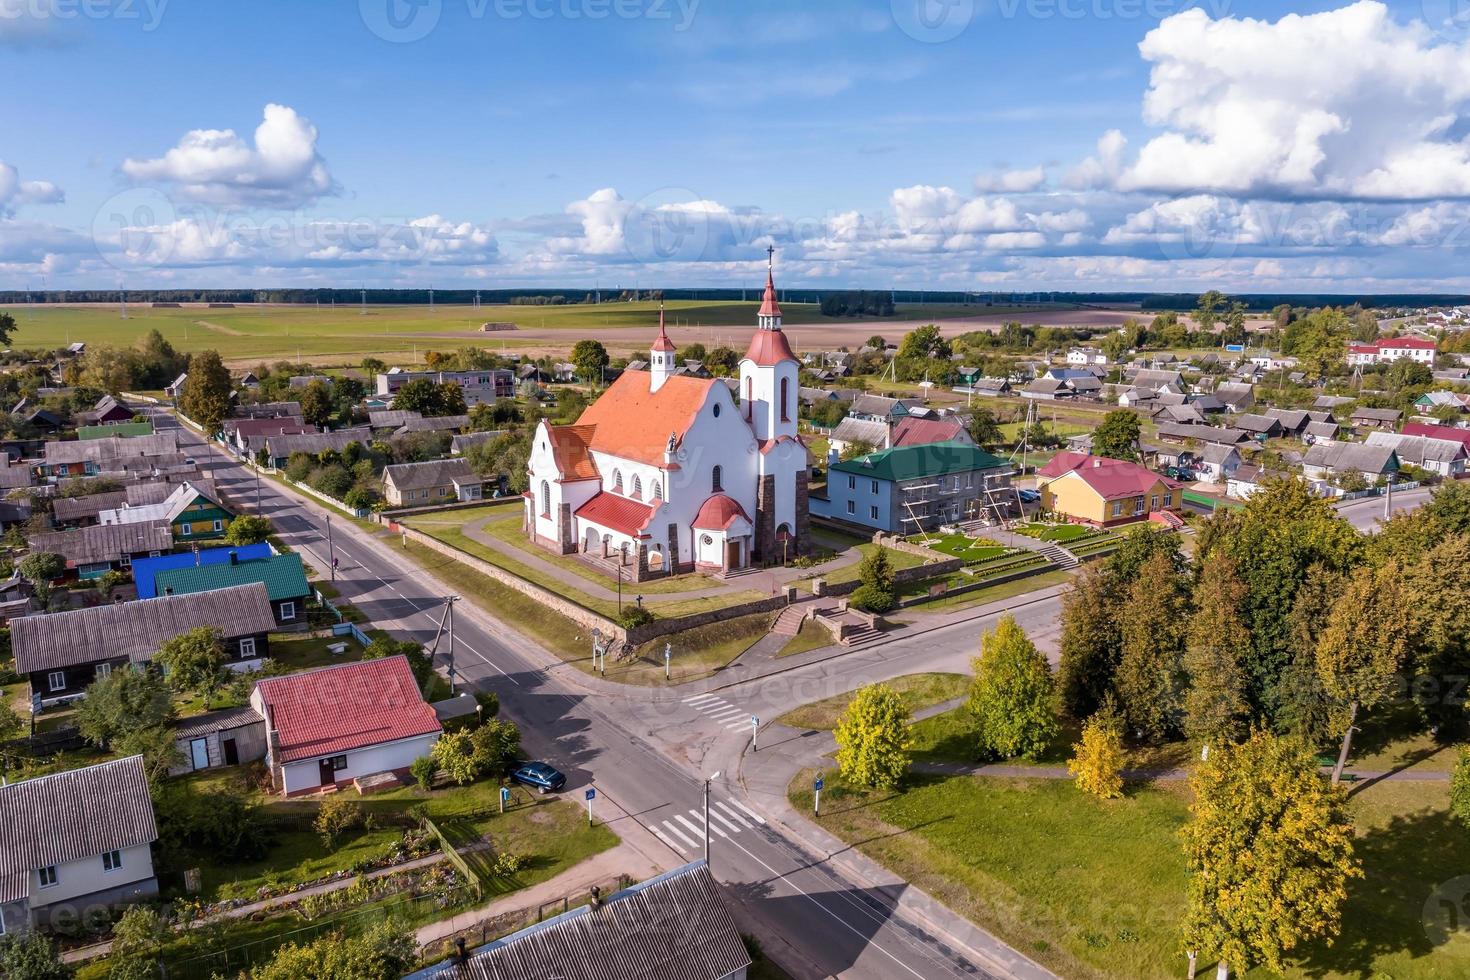 aerial view on baroque temple or catholic church in countryside photo